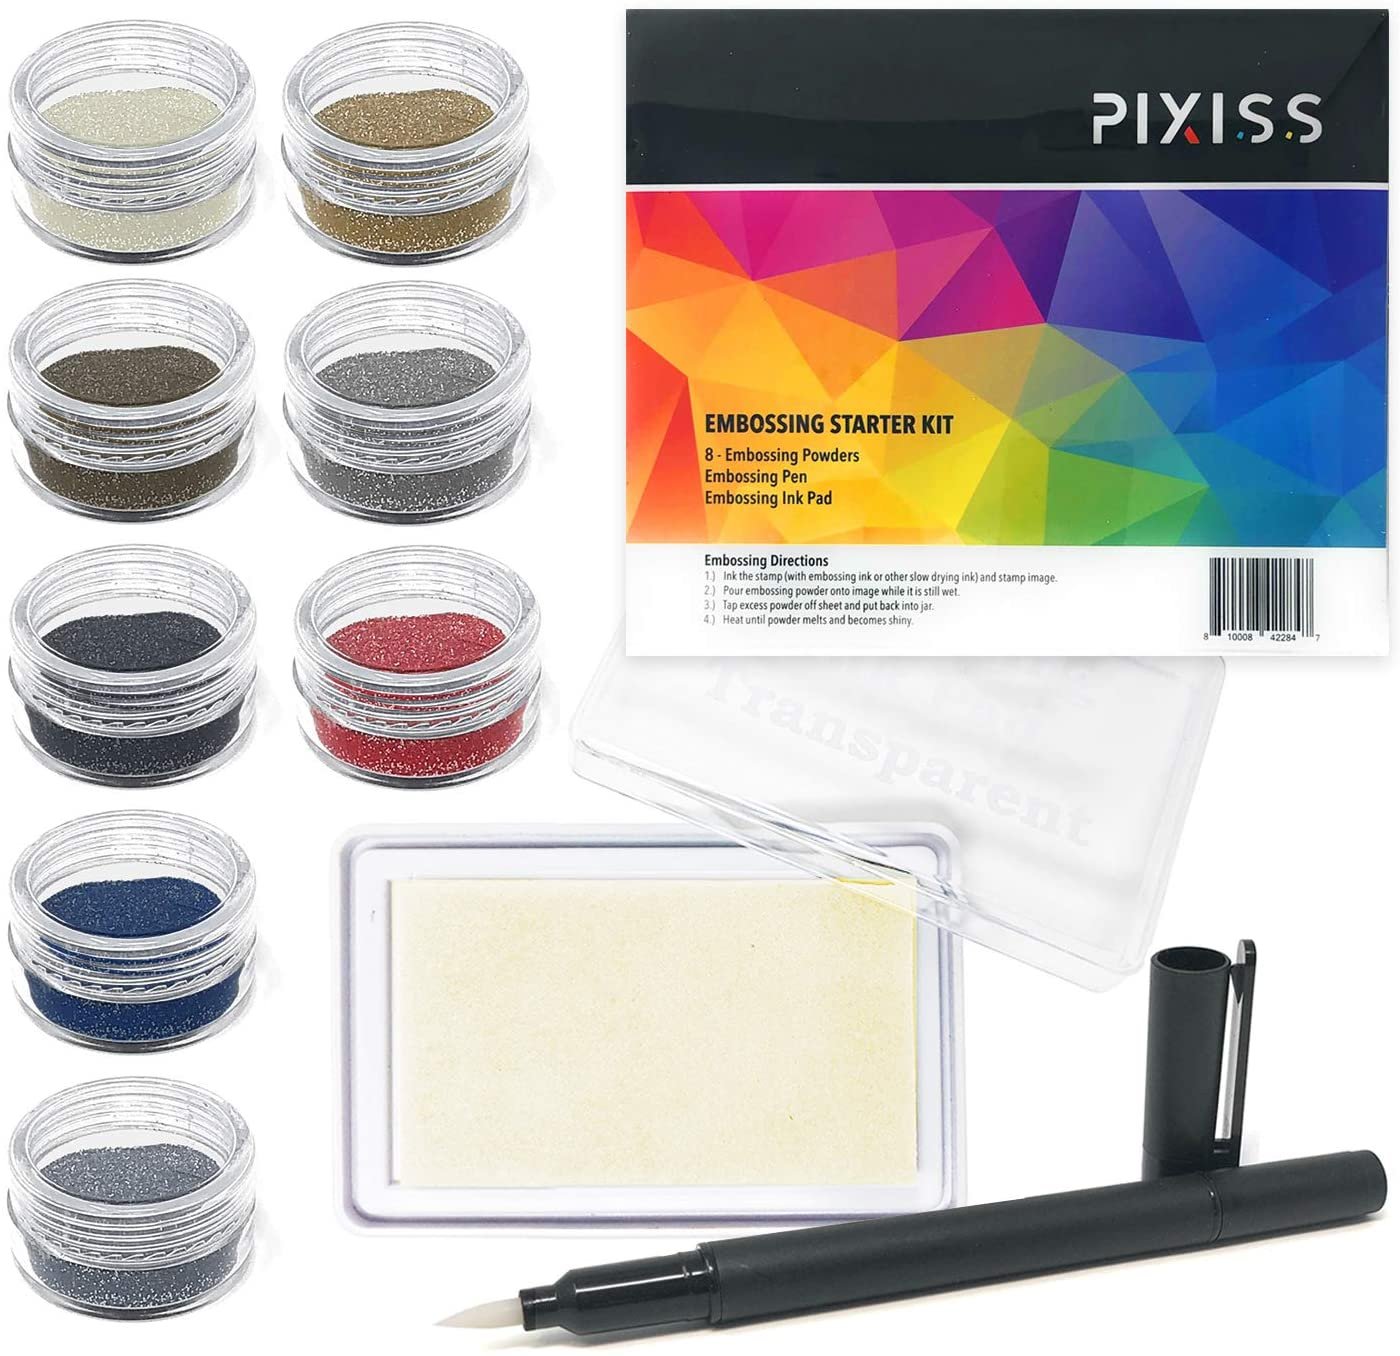 PIXISS Embossing Starter Kit by Pixiss